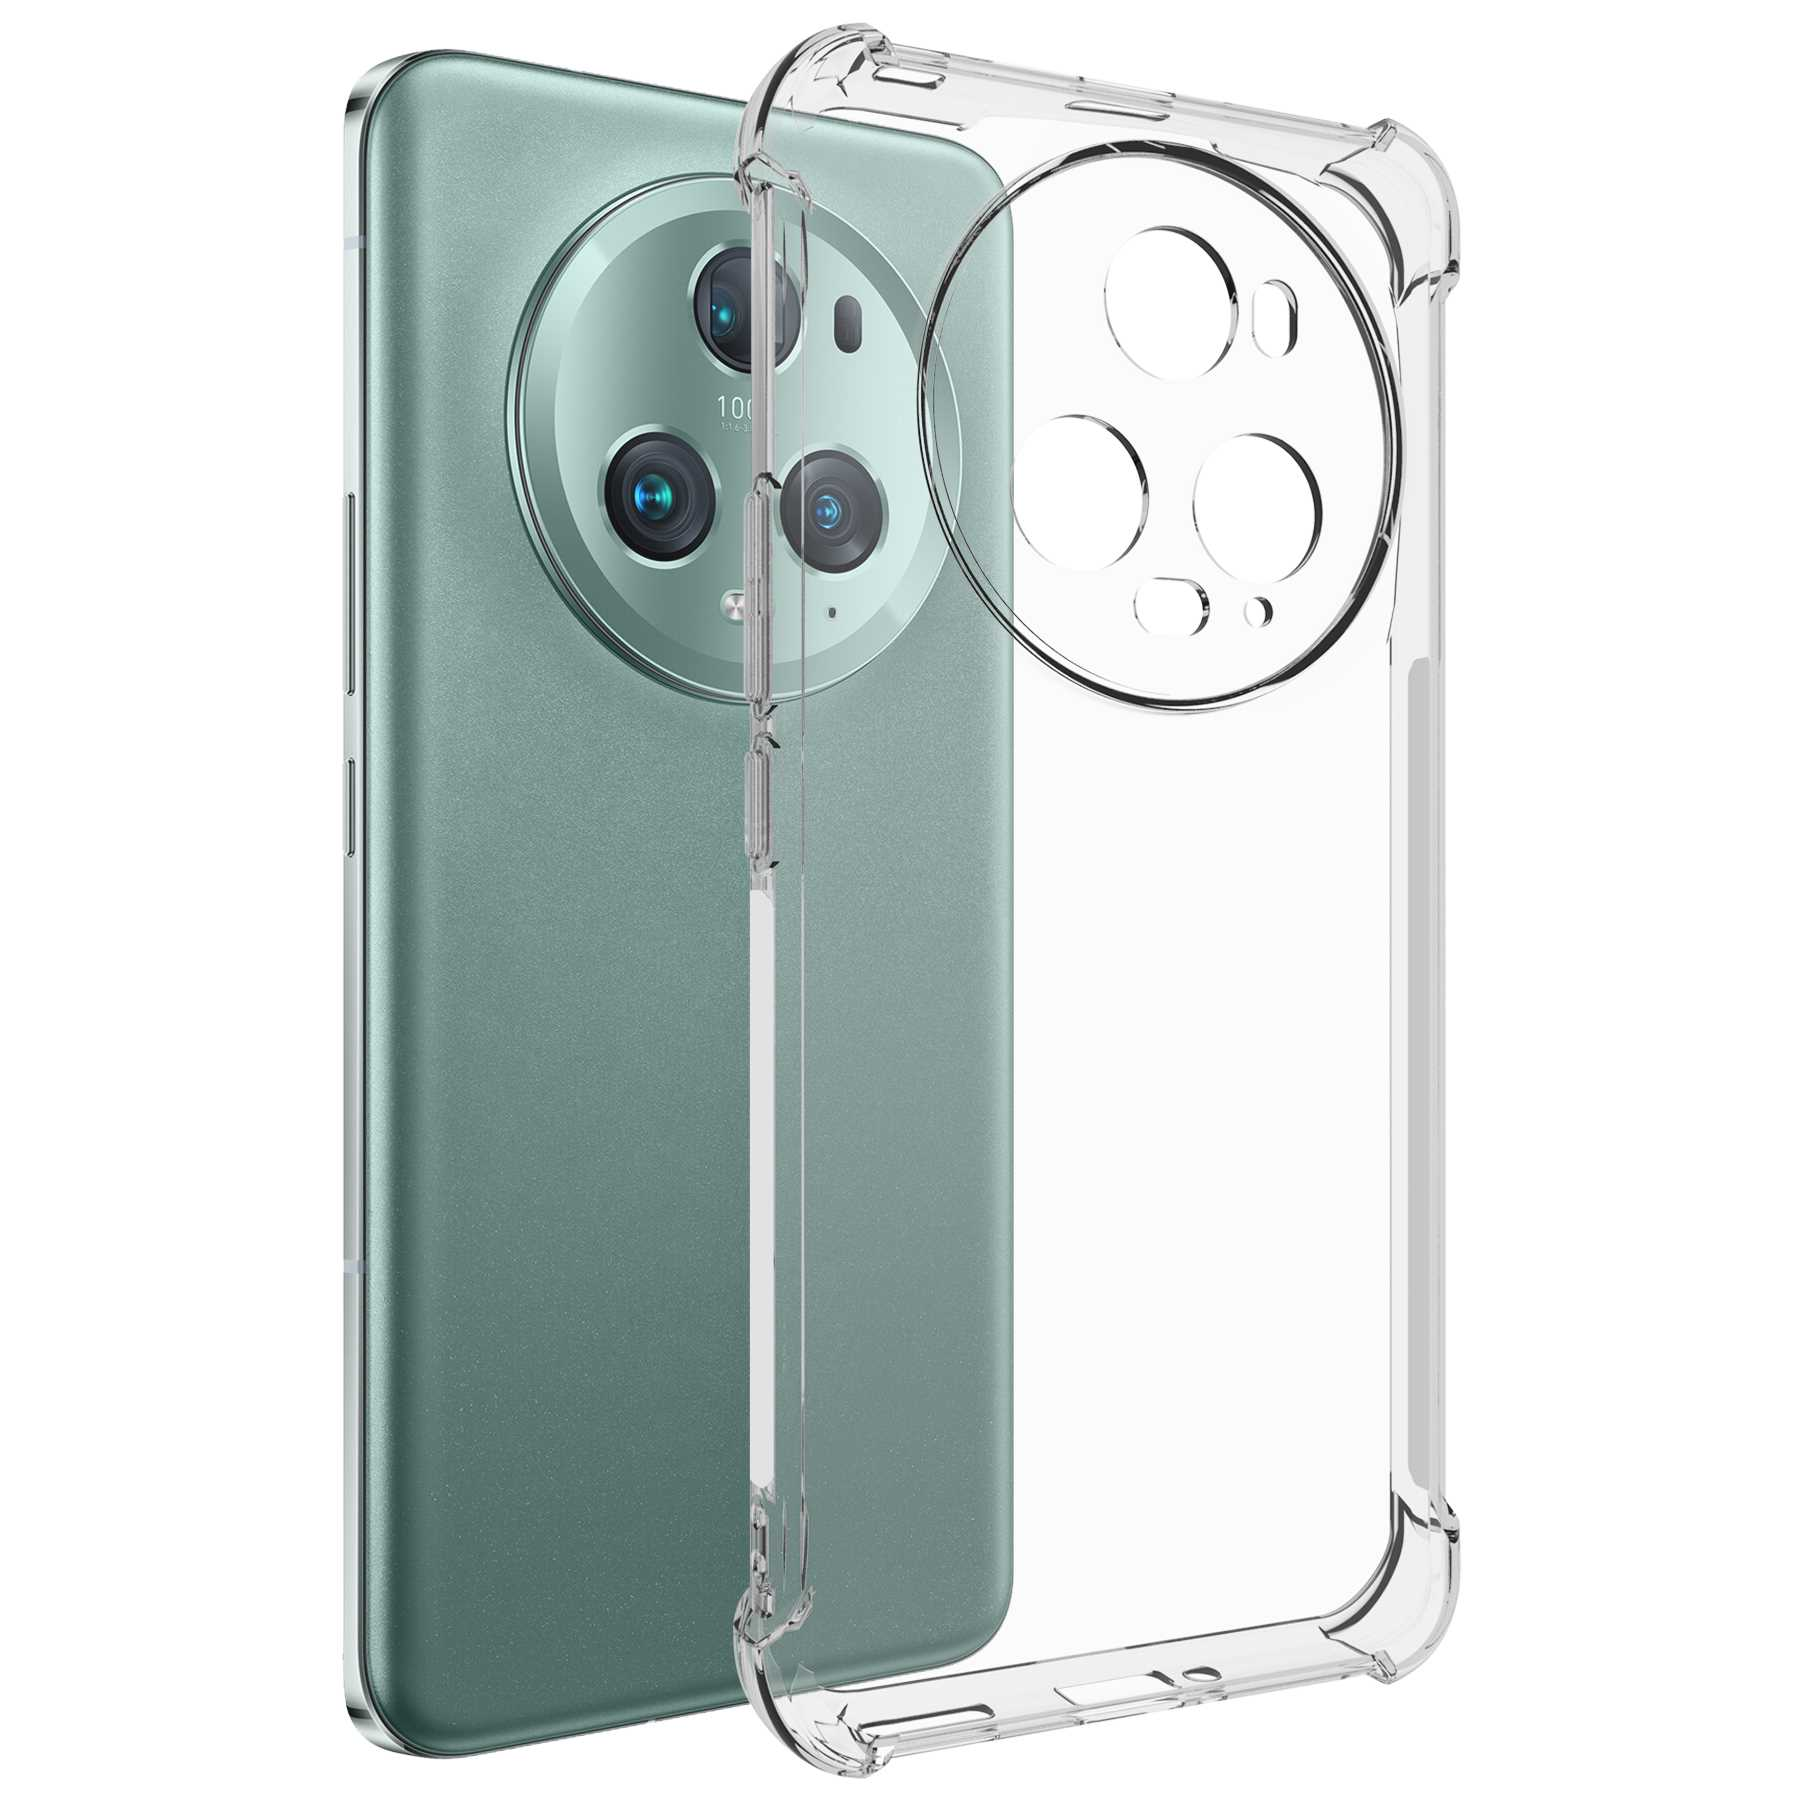 ENERGY Armor 5 Transparent Pro, Clear Backcover, Case, MORE Magic MTB Honor,